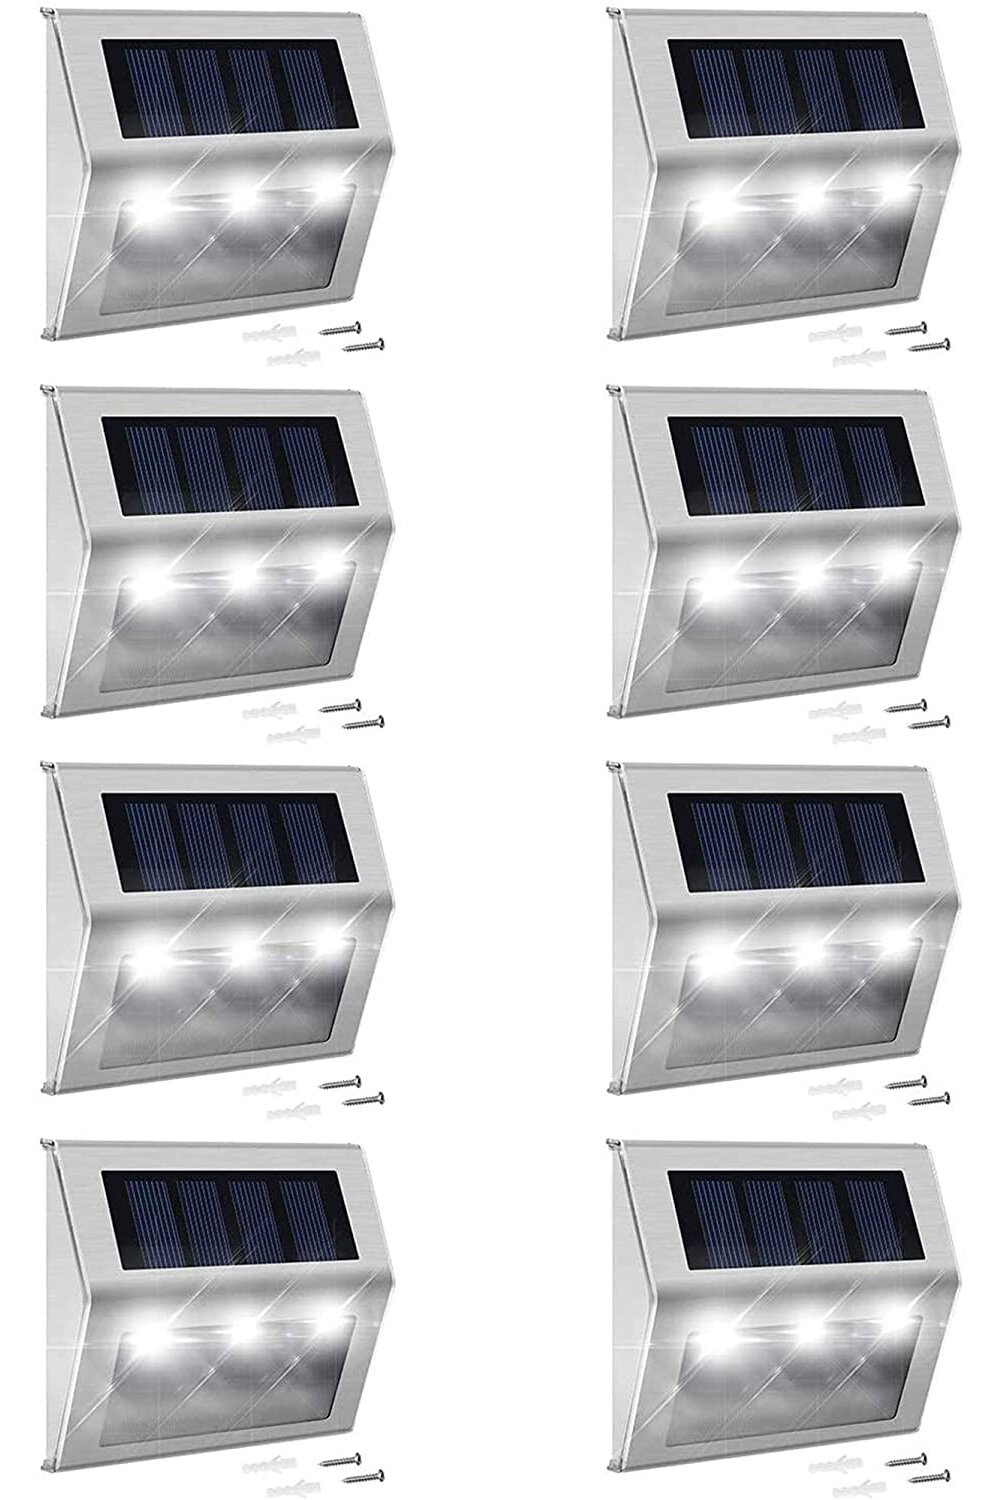 Stainless Steel 3LED Solar Stair Lights Outdoor Courtyard Pathway Street Lamps 